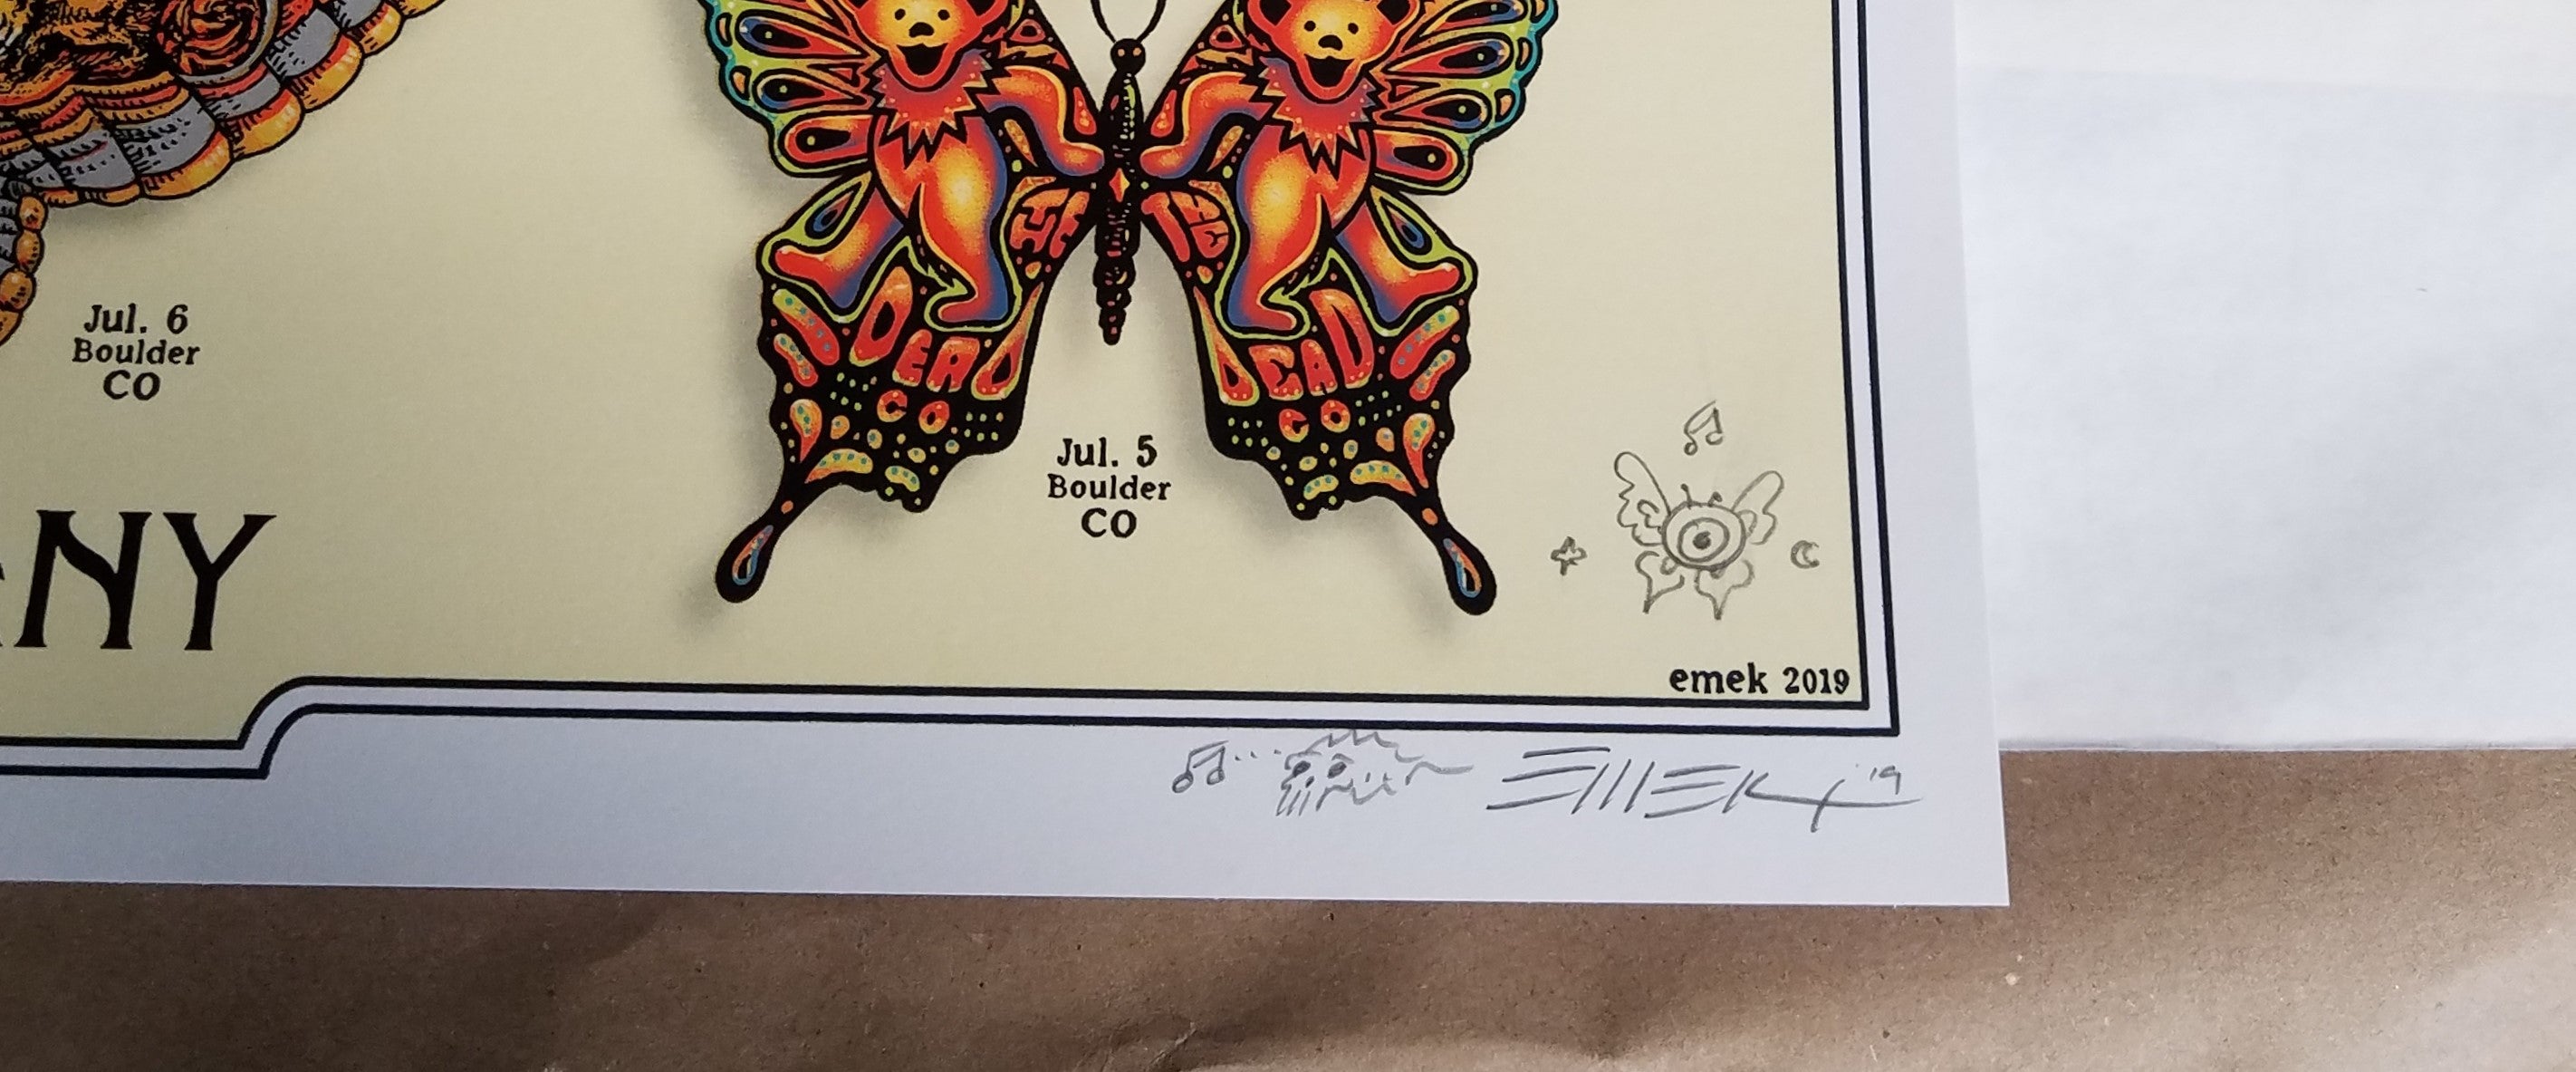 Title:  Dead and Company Summer Tour 2019 Butterflies Artist Edition by Emek  Artist:  Emek  Edition:  xx/100  Type:  Screen Print  Size:  18" x 24"  Location:  Various  Venue:  Various  Notes:  2019 Dead & Company Summer Tour Poster.  Signed, numbered, embossed and double doodled by the artist  All prints are stored flat.  Following purchase, all prints are rolled in archival paper and shipped in a sturdy cardboard tube which is bubble wrapped on the inside for each end.